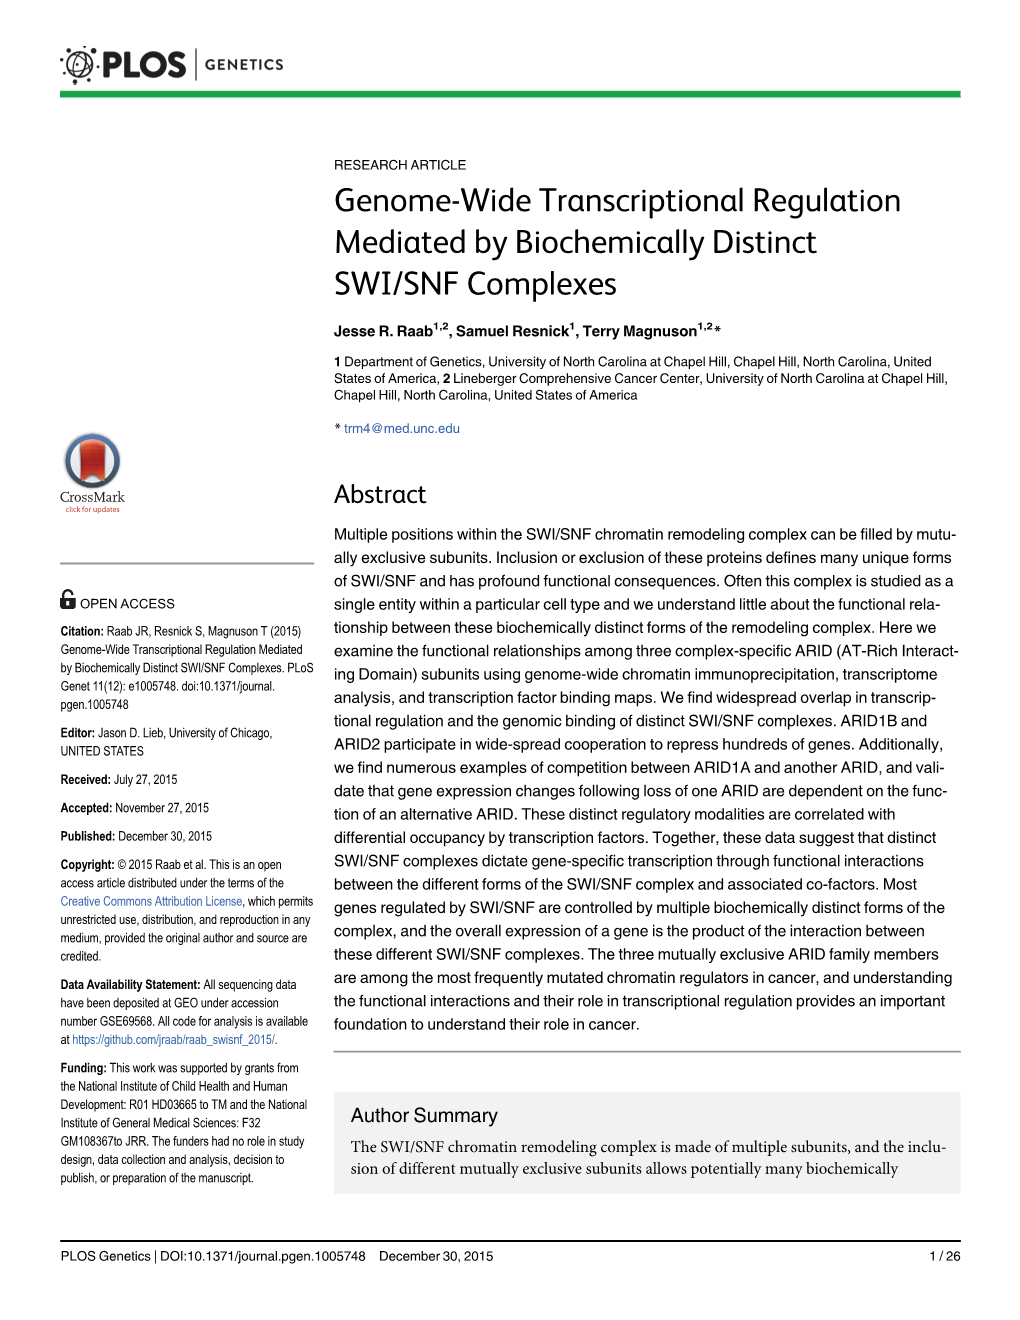 Genome-Wide Transcriptional Regulation Mediated by Biochemically Distinct SWI/SNF Complexes